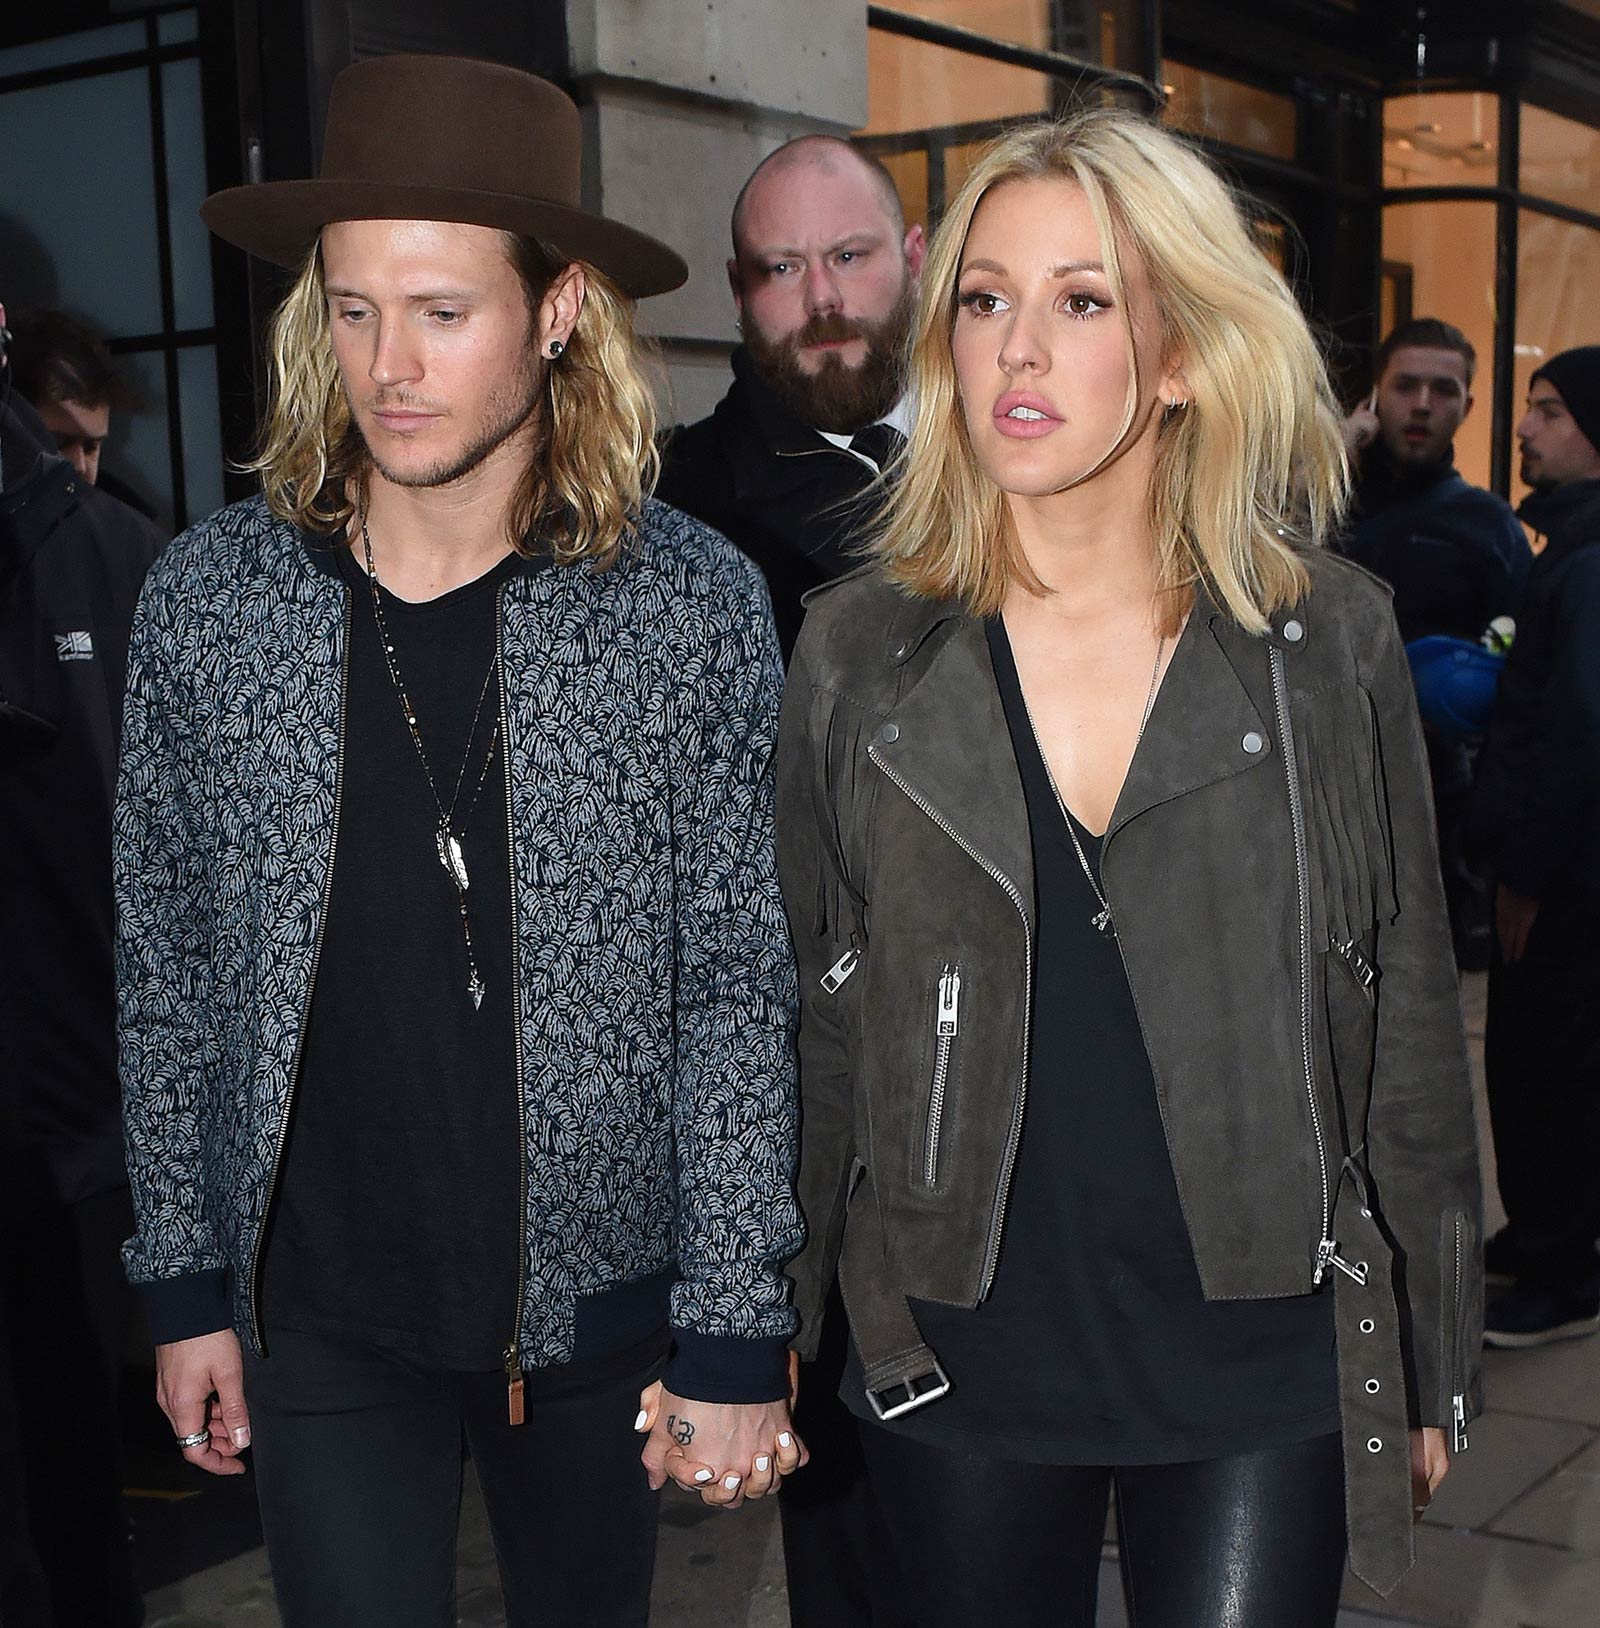 Ellie Goulding heading to a private gig in London